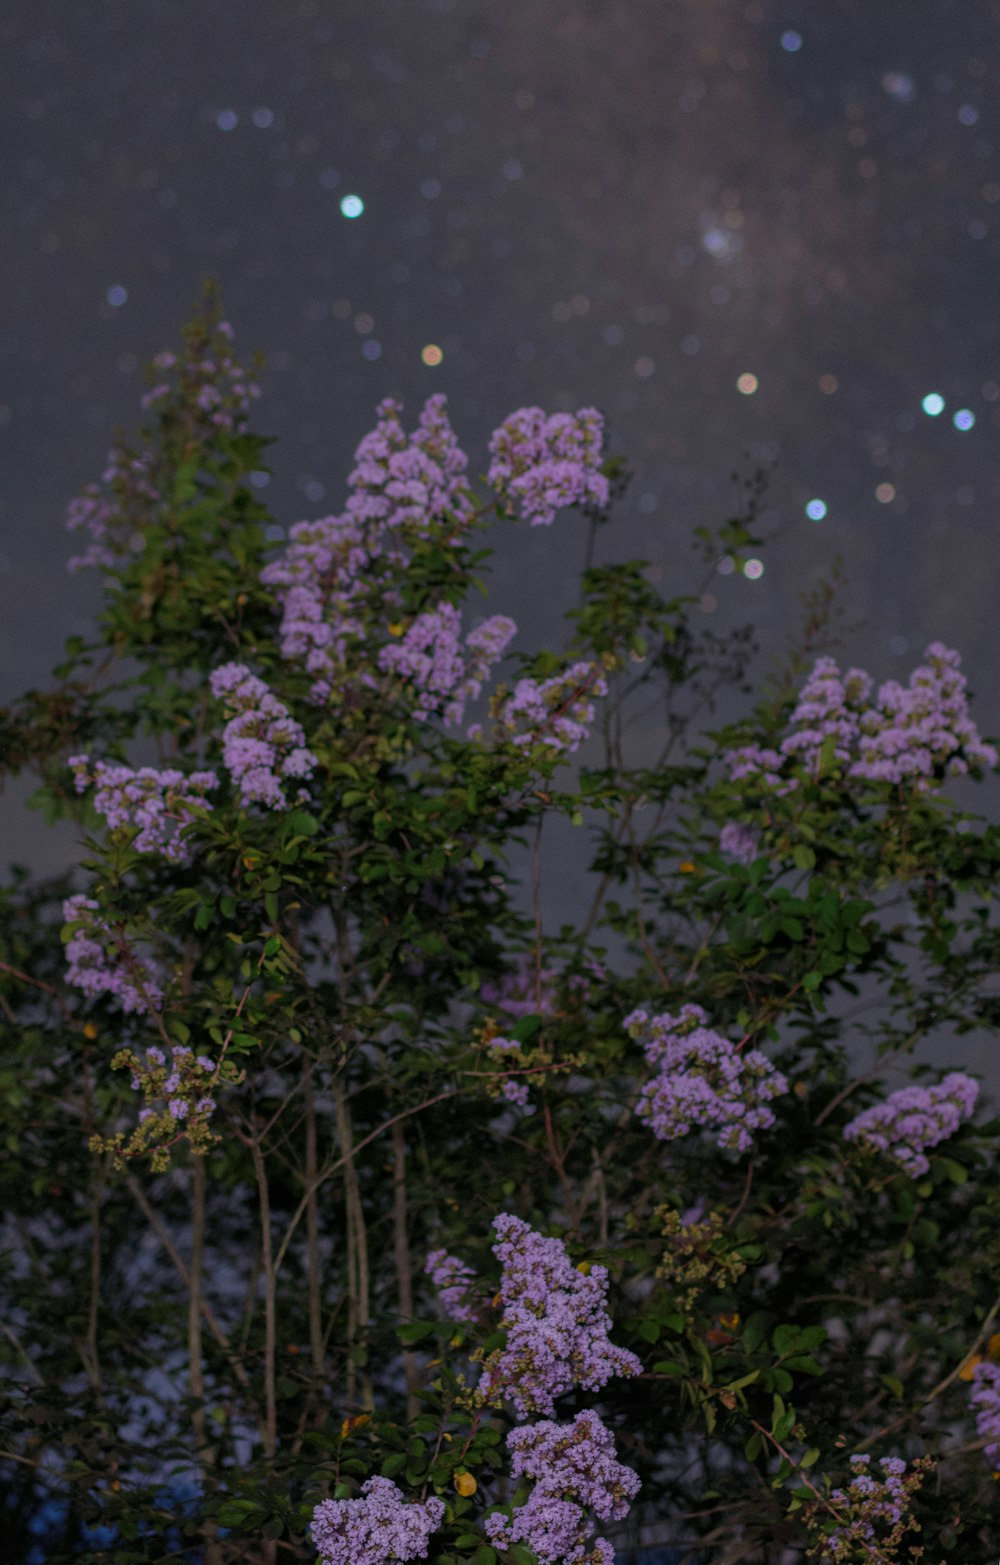 purple flowers are blooming in the night sky